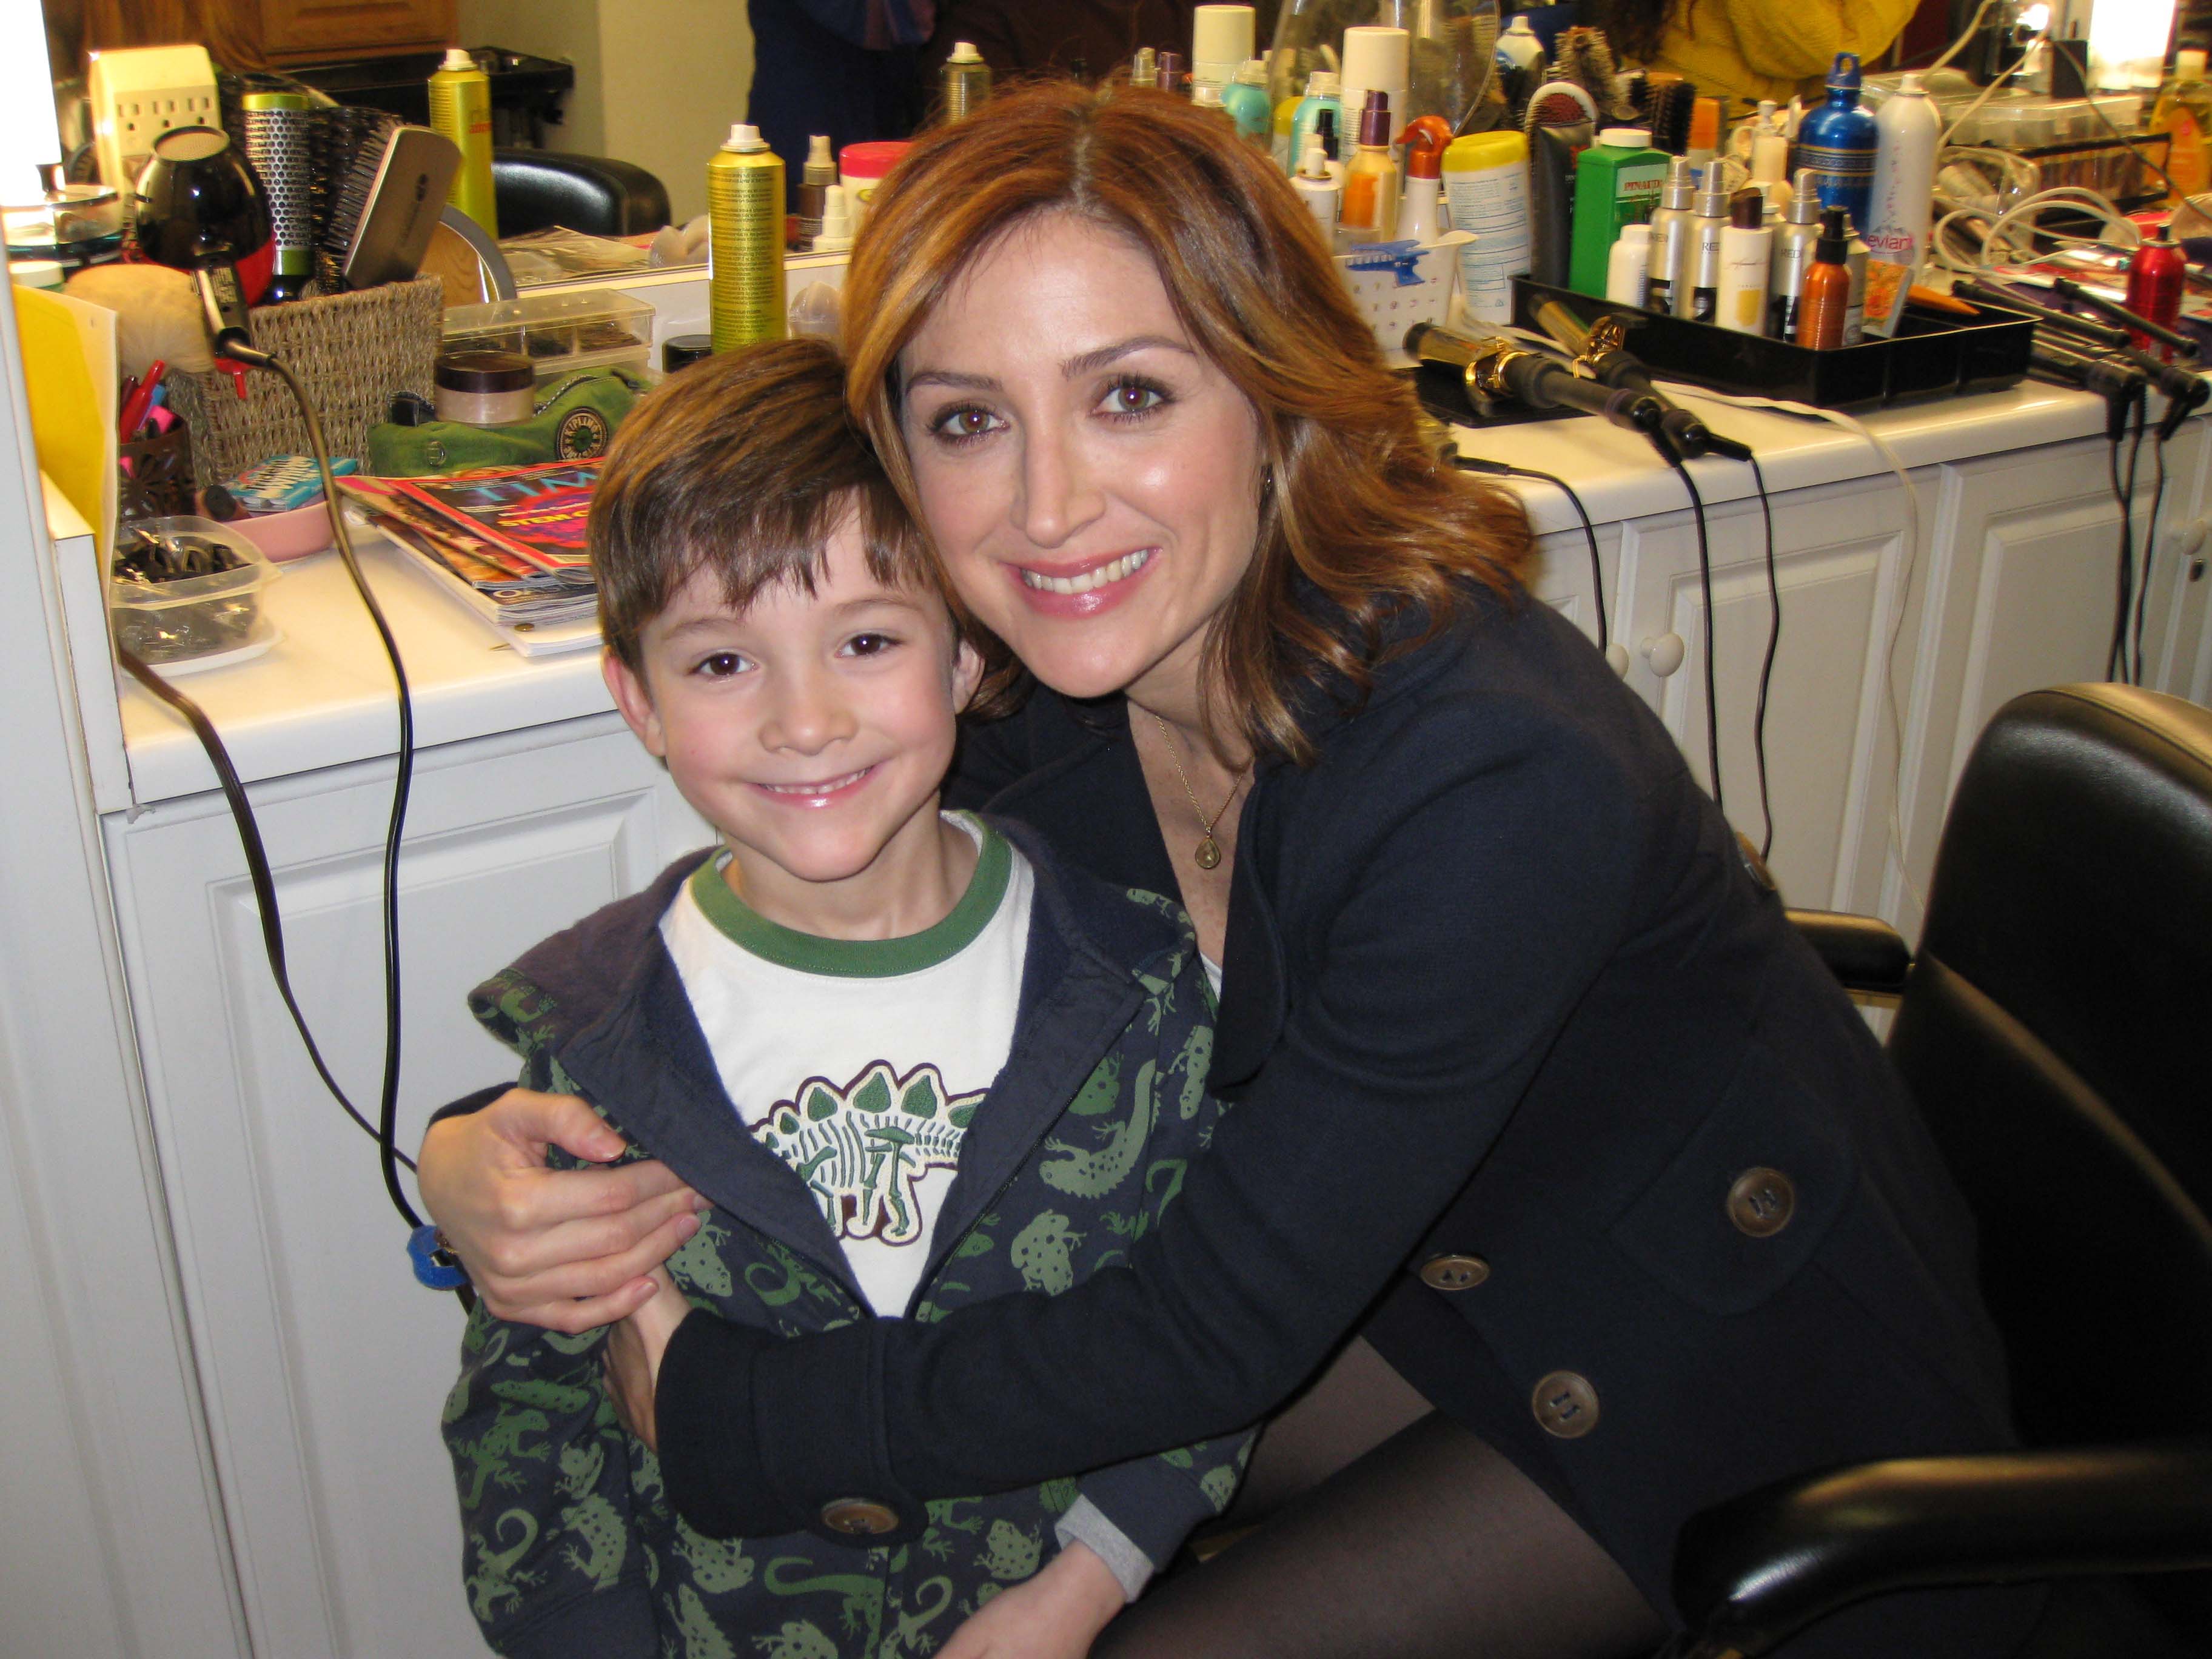 Griffin Cleveland and Sasha Alexander on the set of the pilot, The Karenskys.